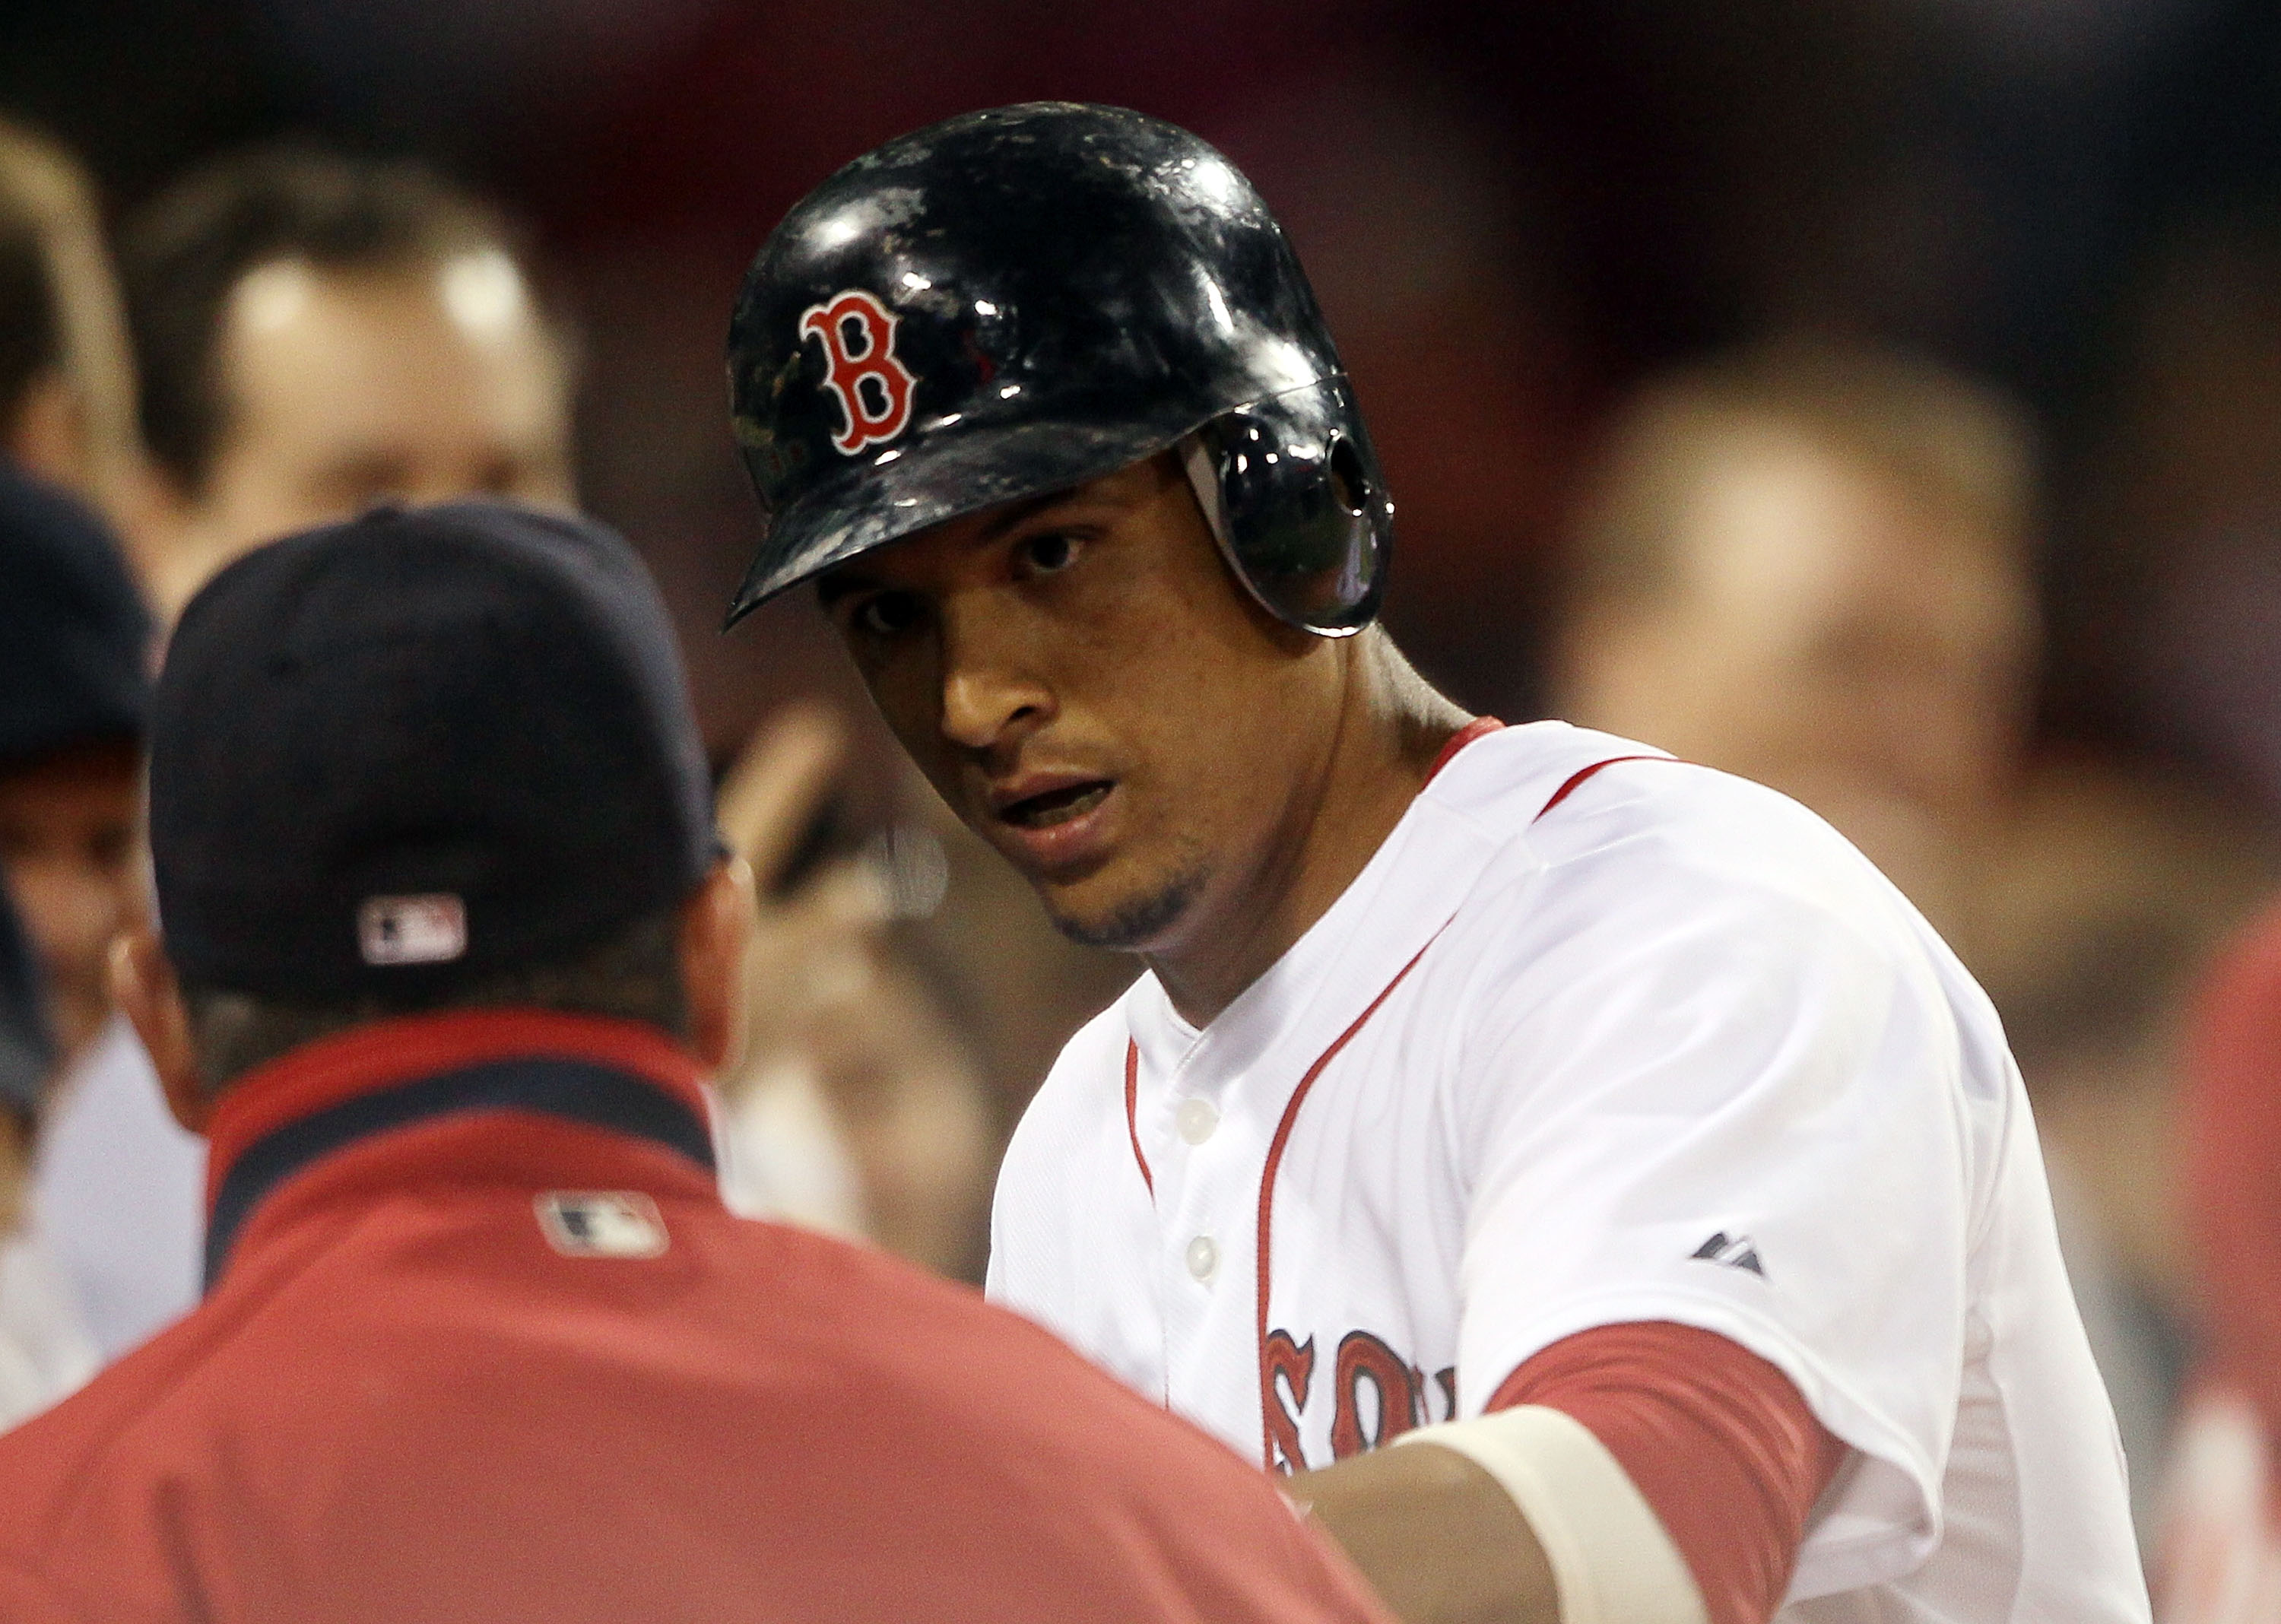 Victor Martinez: Ex-Indians/Red Sox star signs with Detroit Tigers 